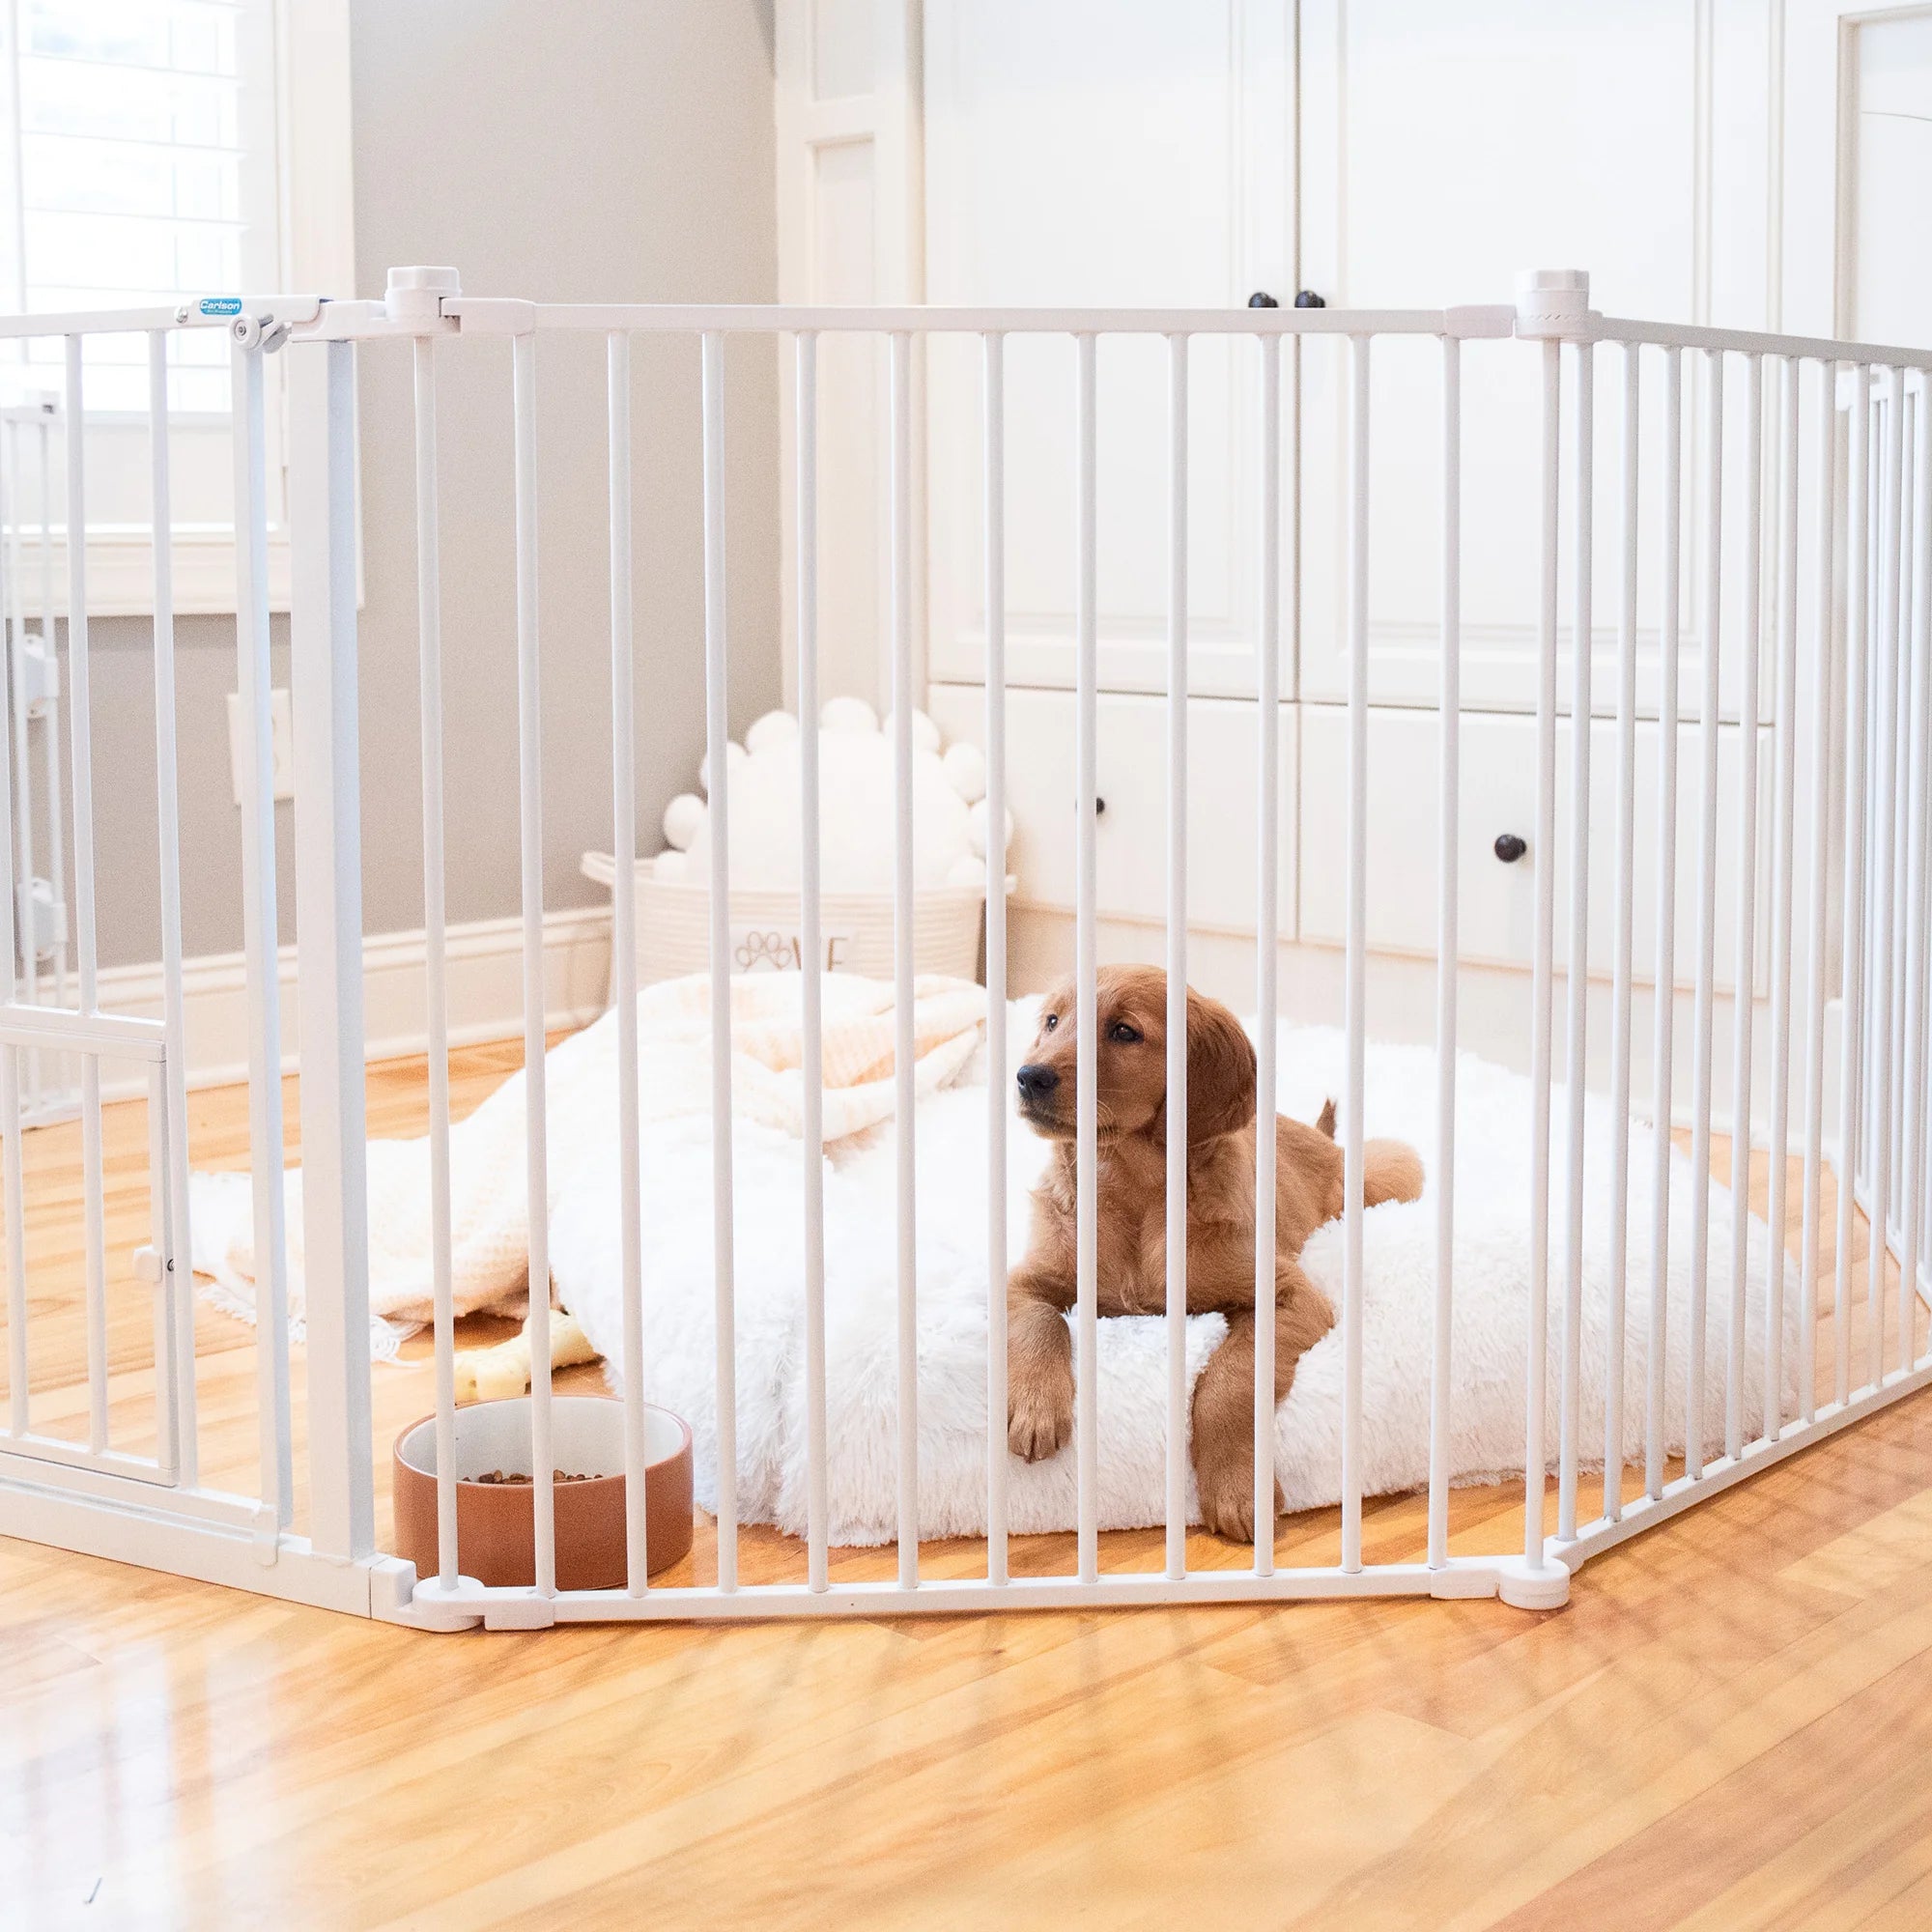 Dog laying in living room on soft bed while in the 2-in-1 Super Wide Pet Pen & Gate.